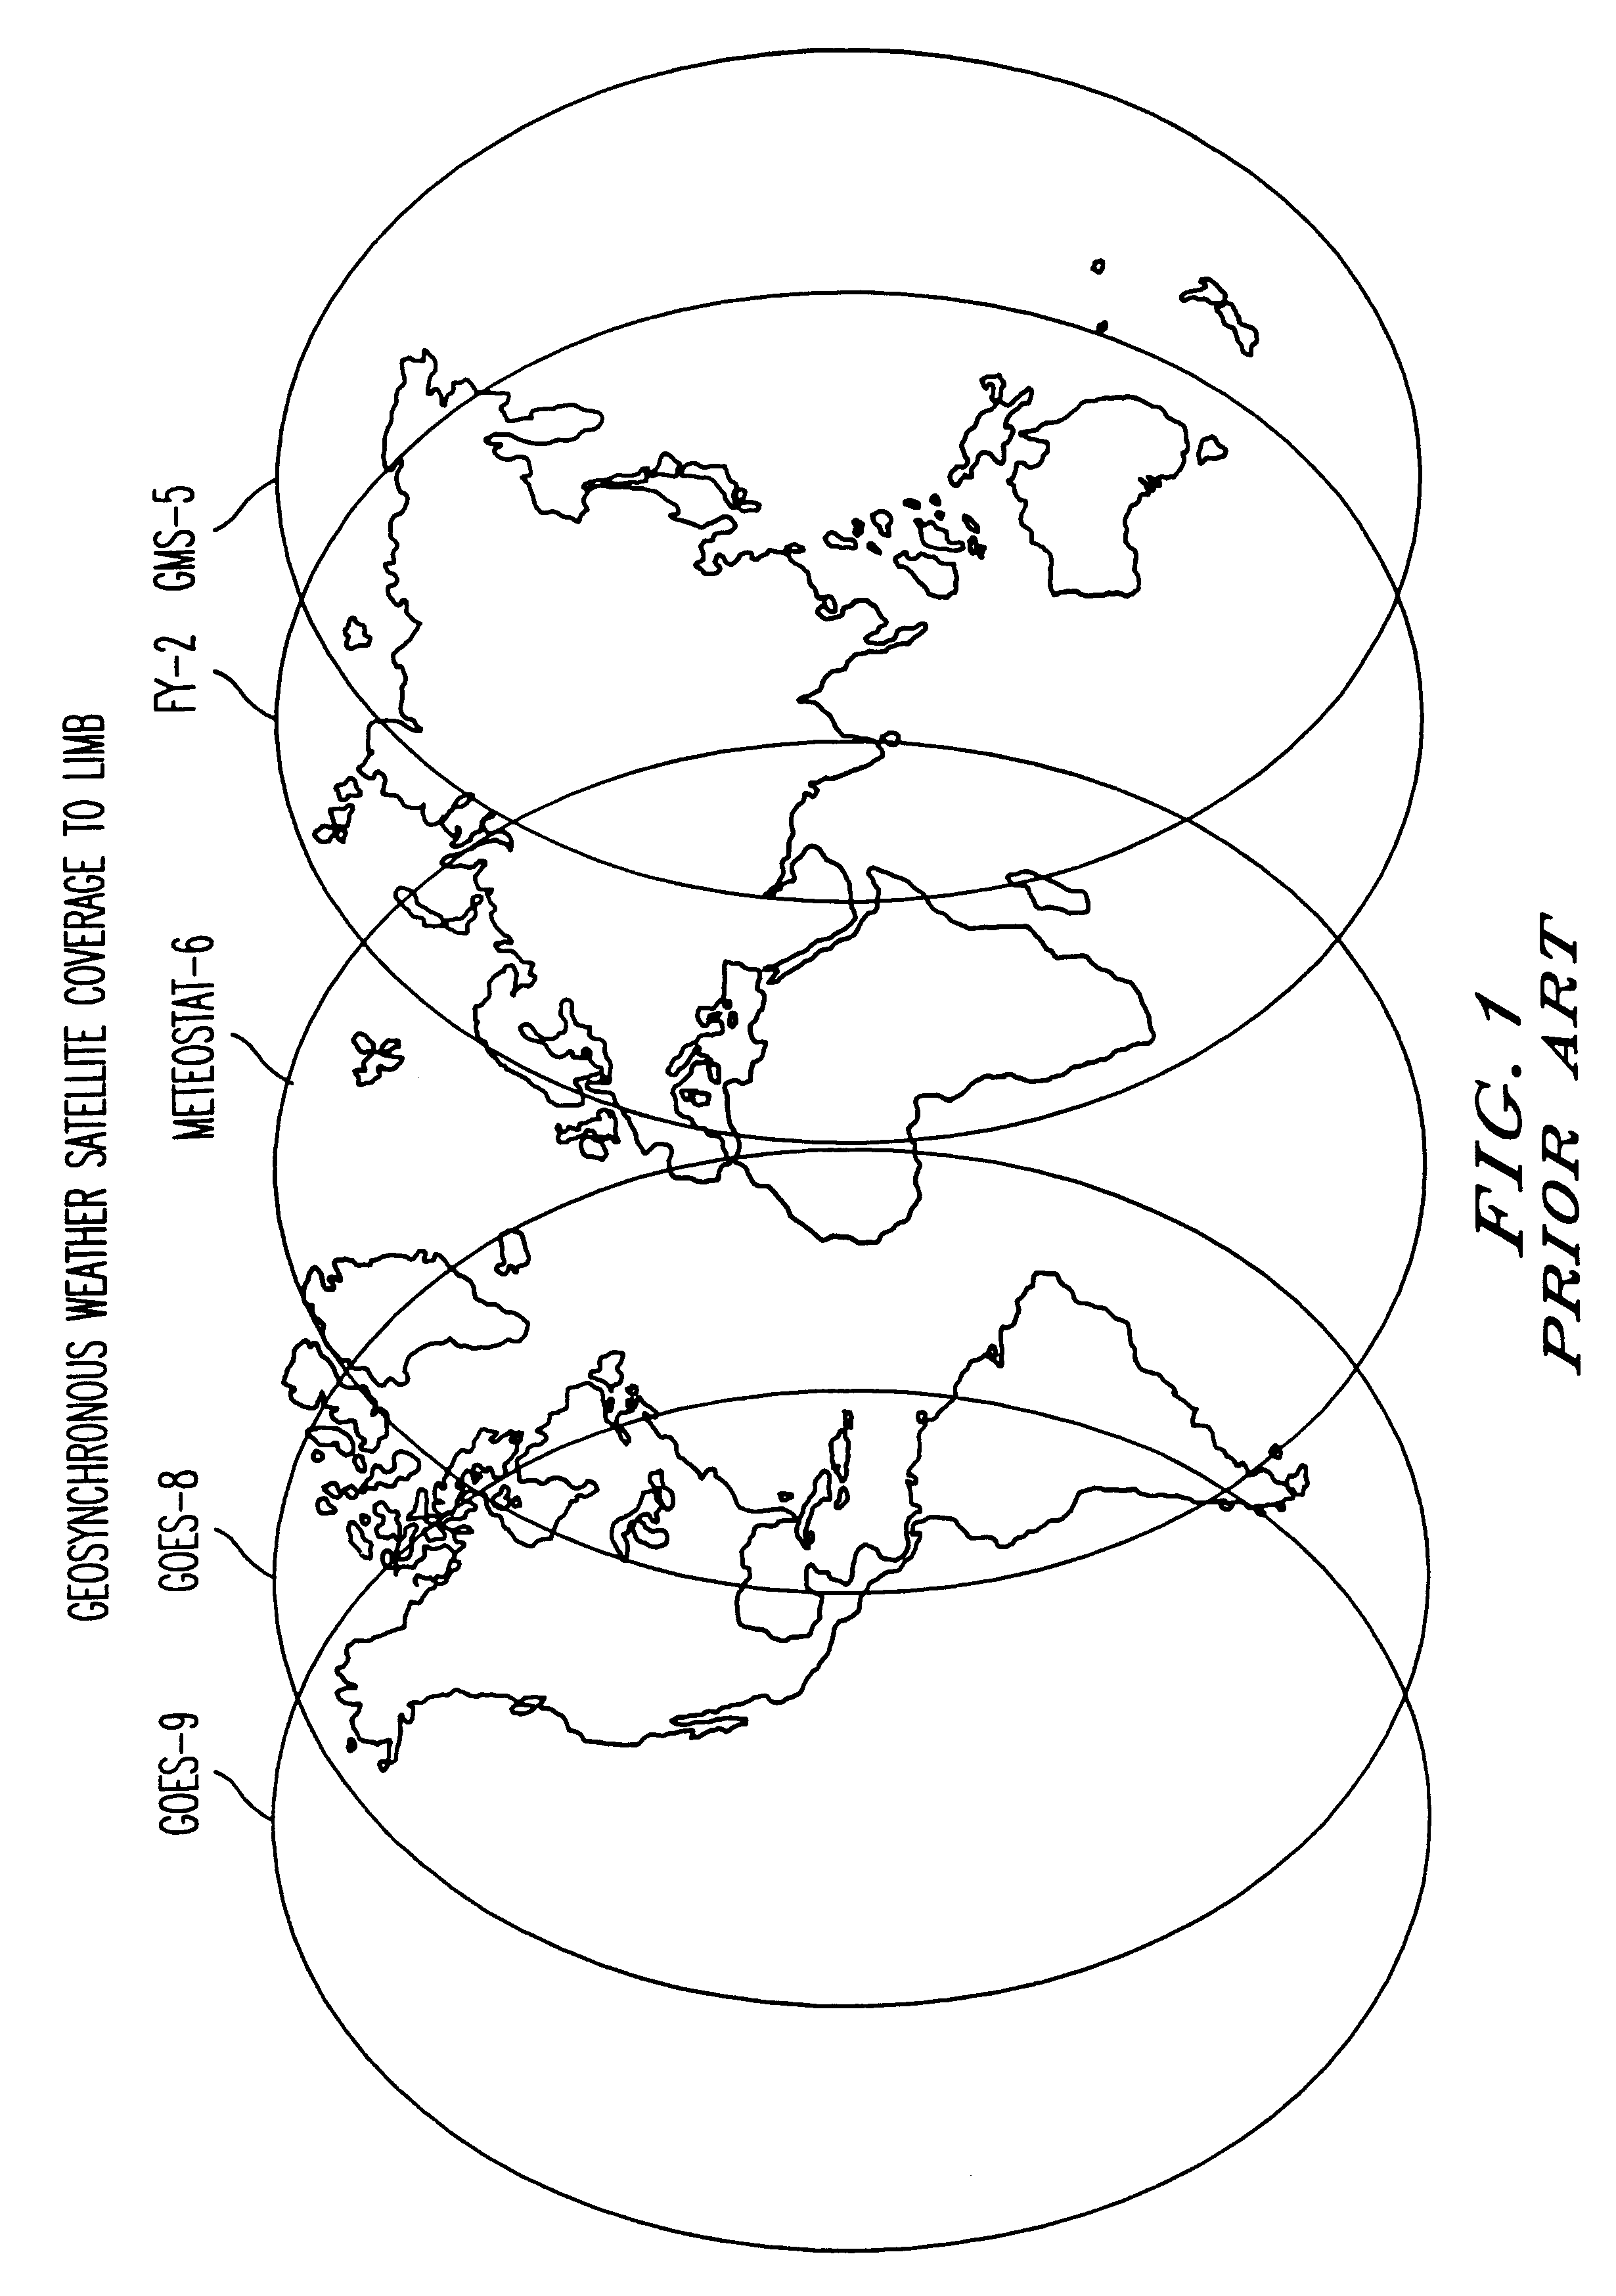 Direct broadcast imaging satellite system apparatus and method for providing real-time, continuous monitoring of Earth from geostationary Earth orbit